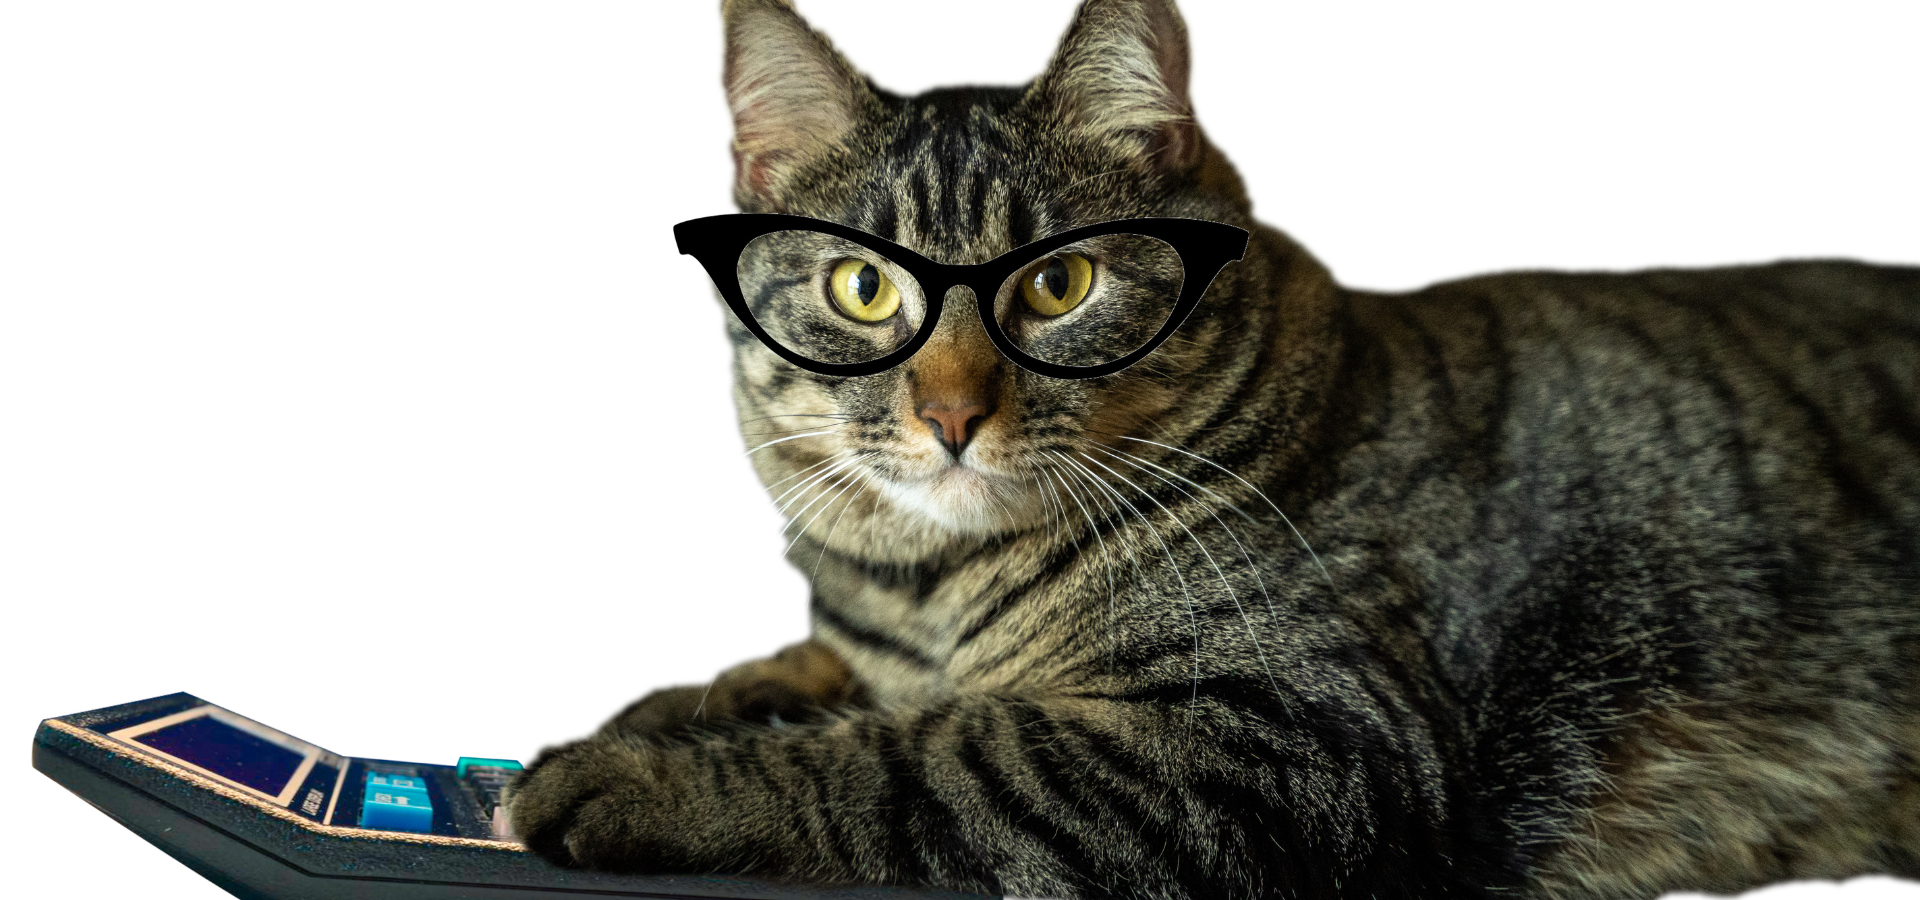 Cat with glasses typing on a calculator and staring at camera.